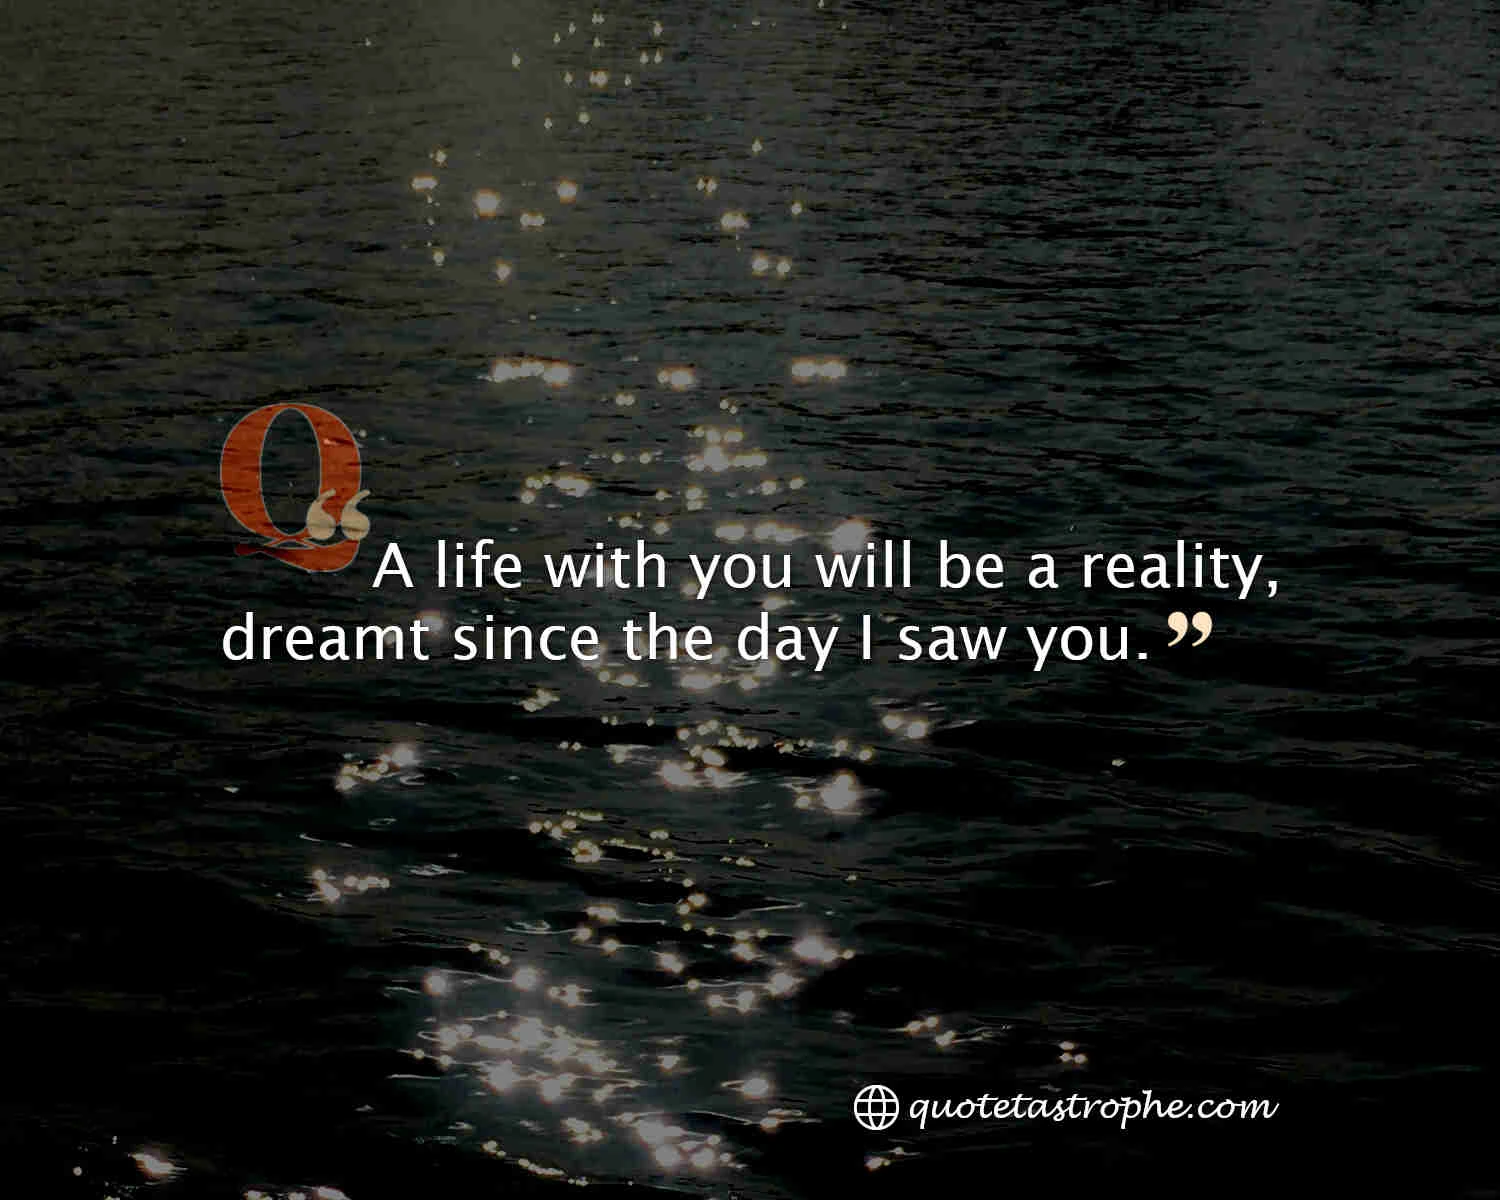 A Life With You Will be a Reality